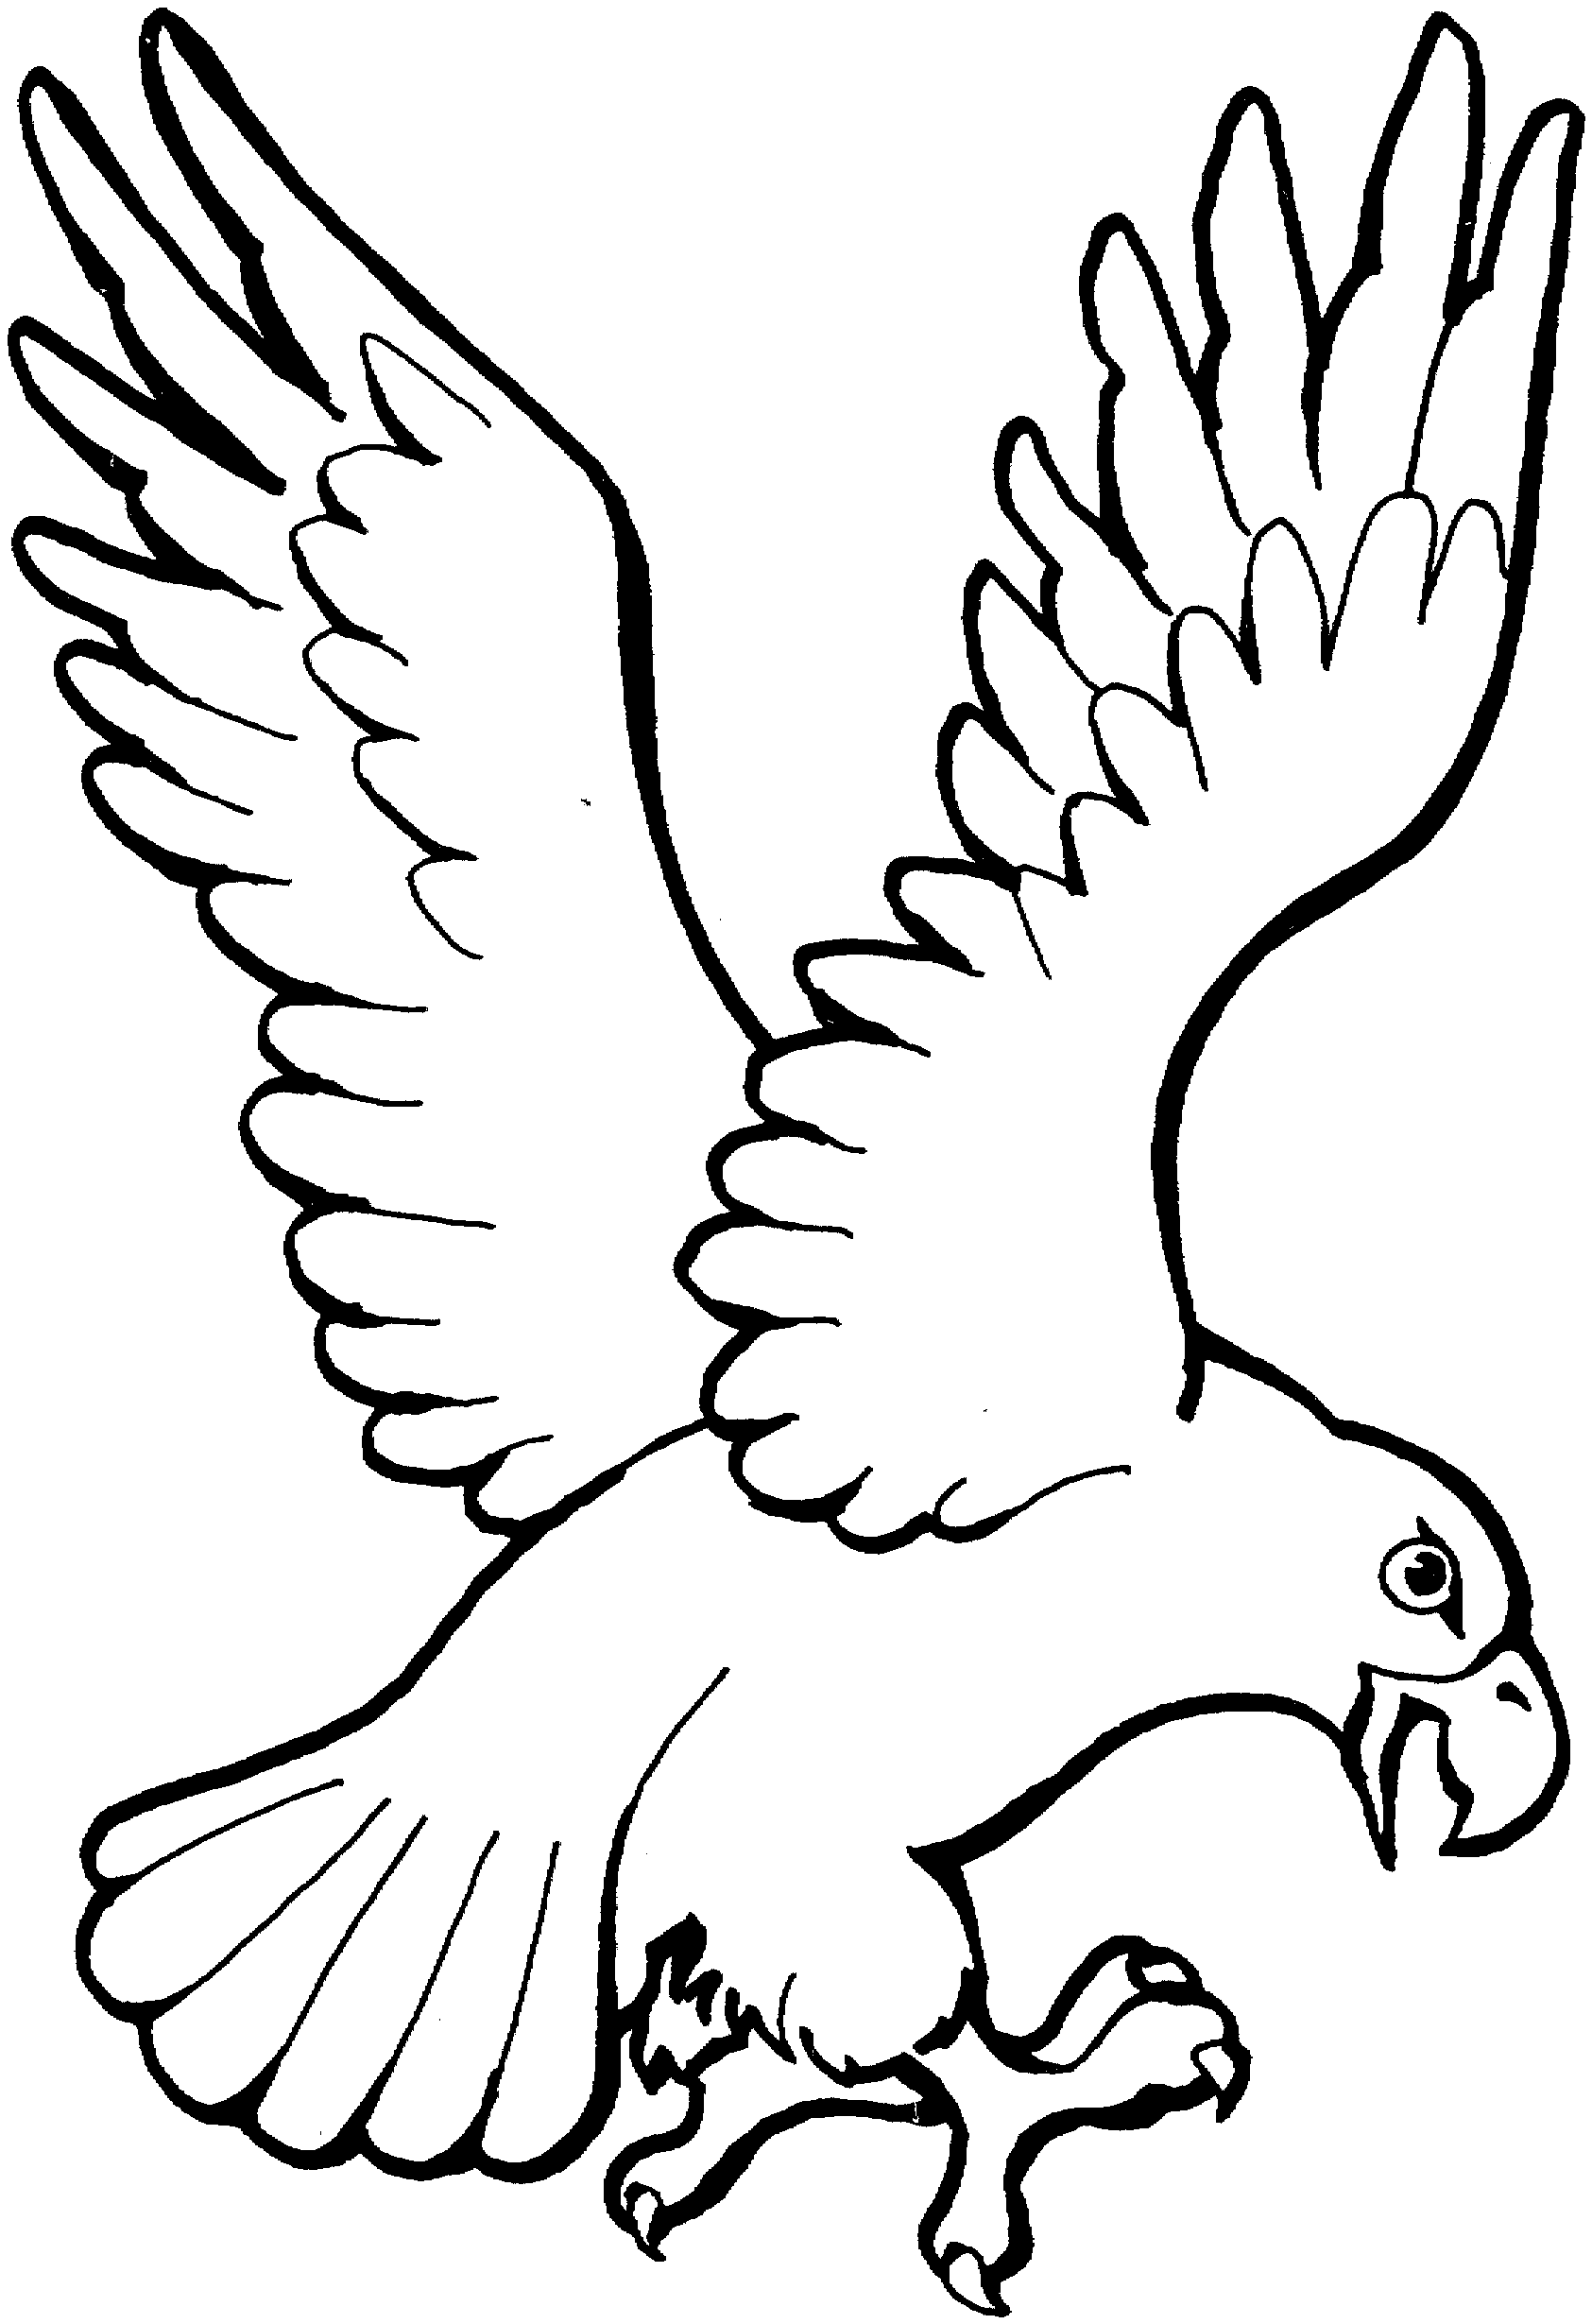 eagle colouring pictures free printable bald eagle coloring pages for kids pictures eagle colouring 